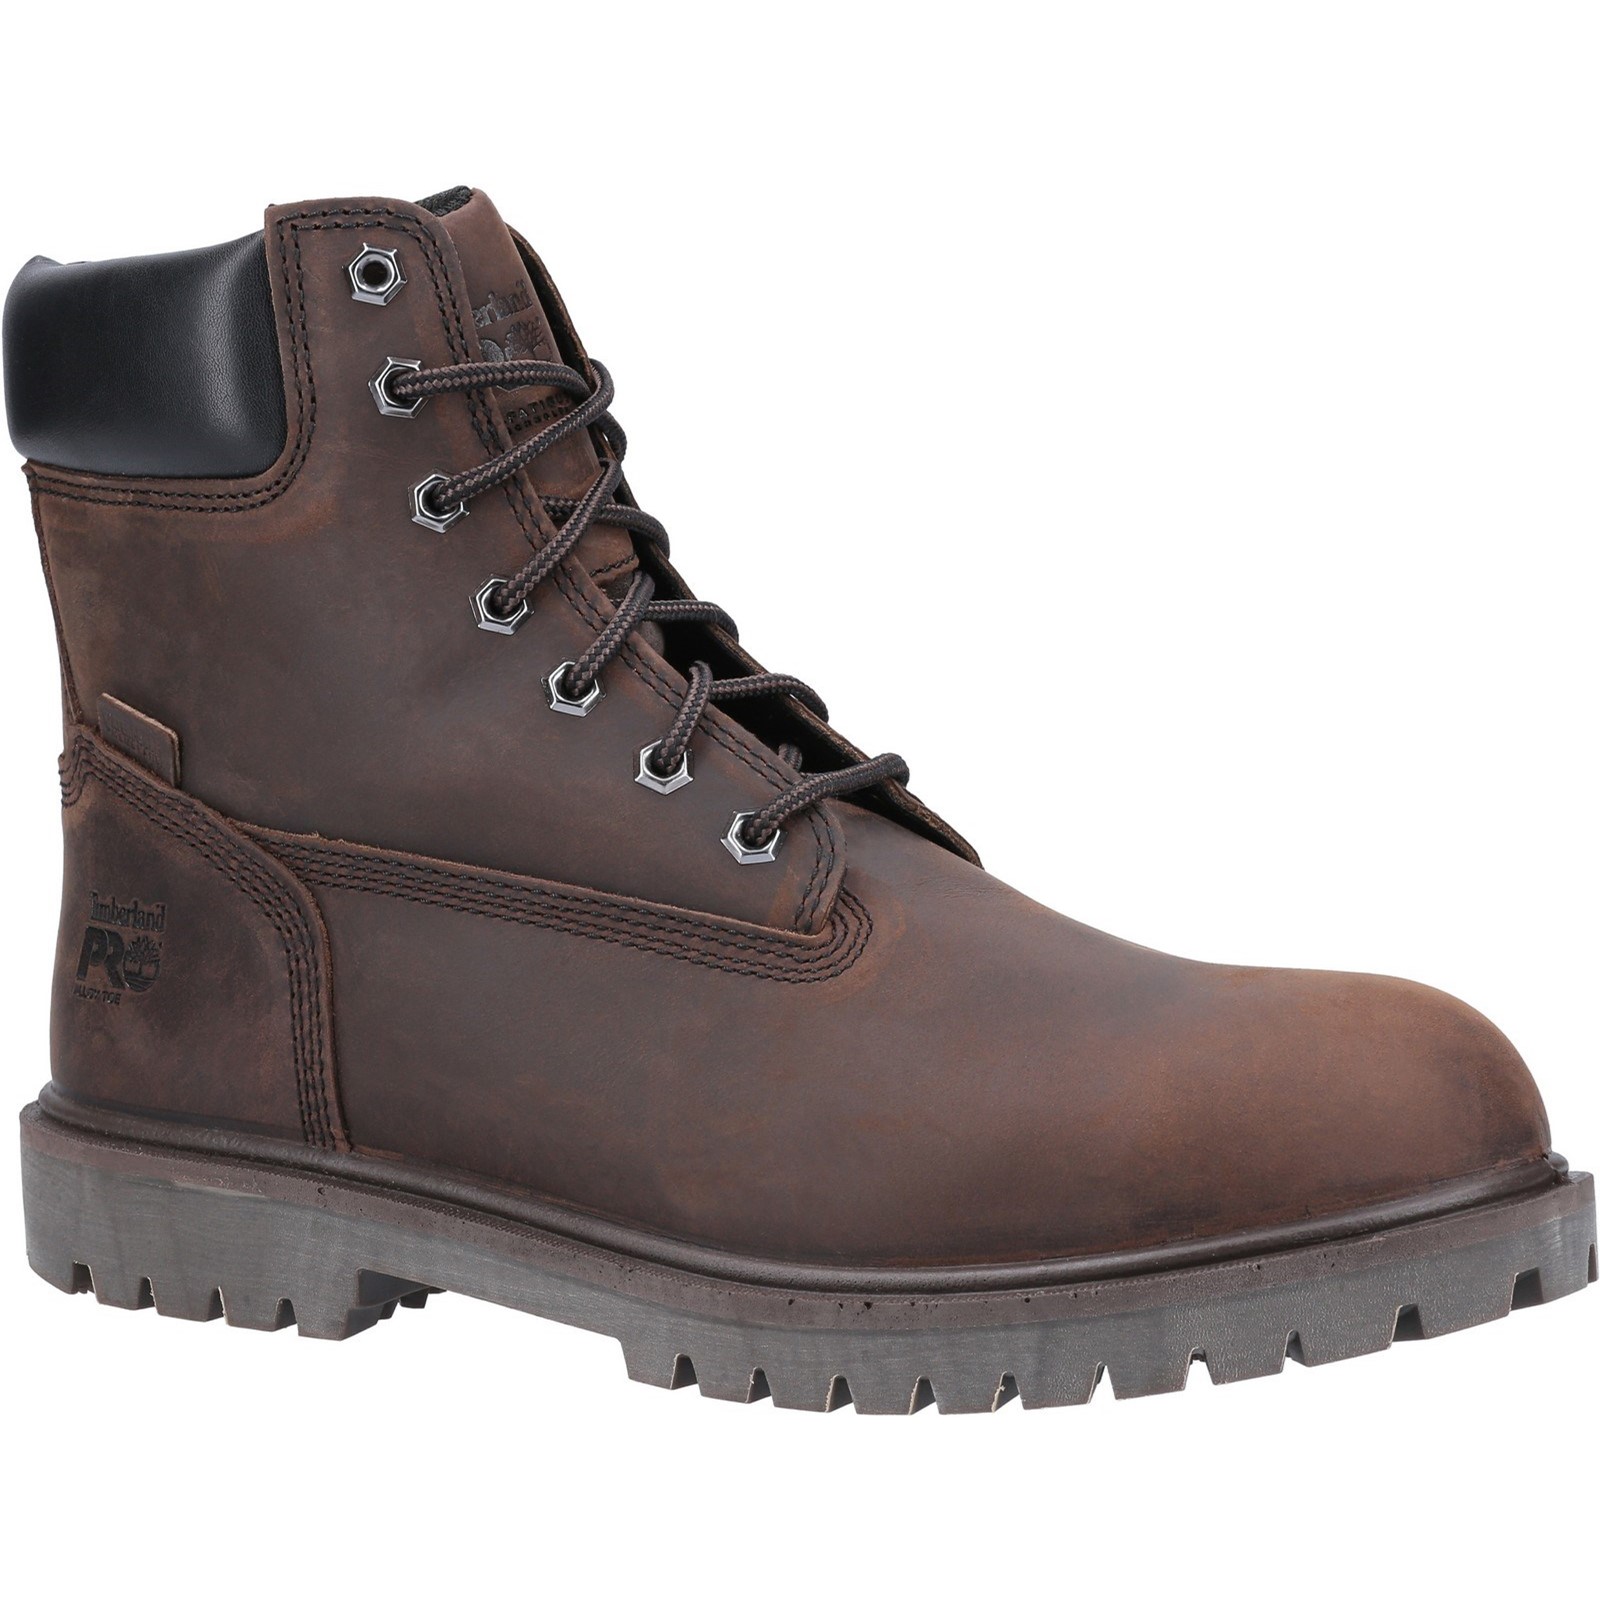 Iconic Safety Toe Work Boot